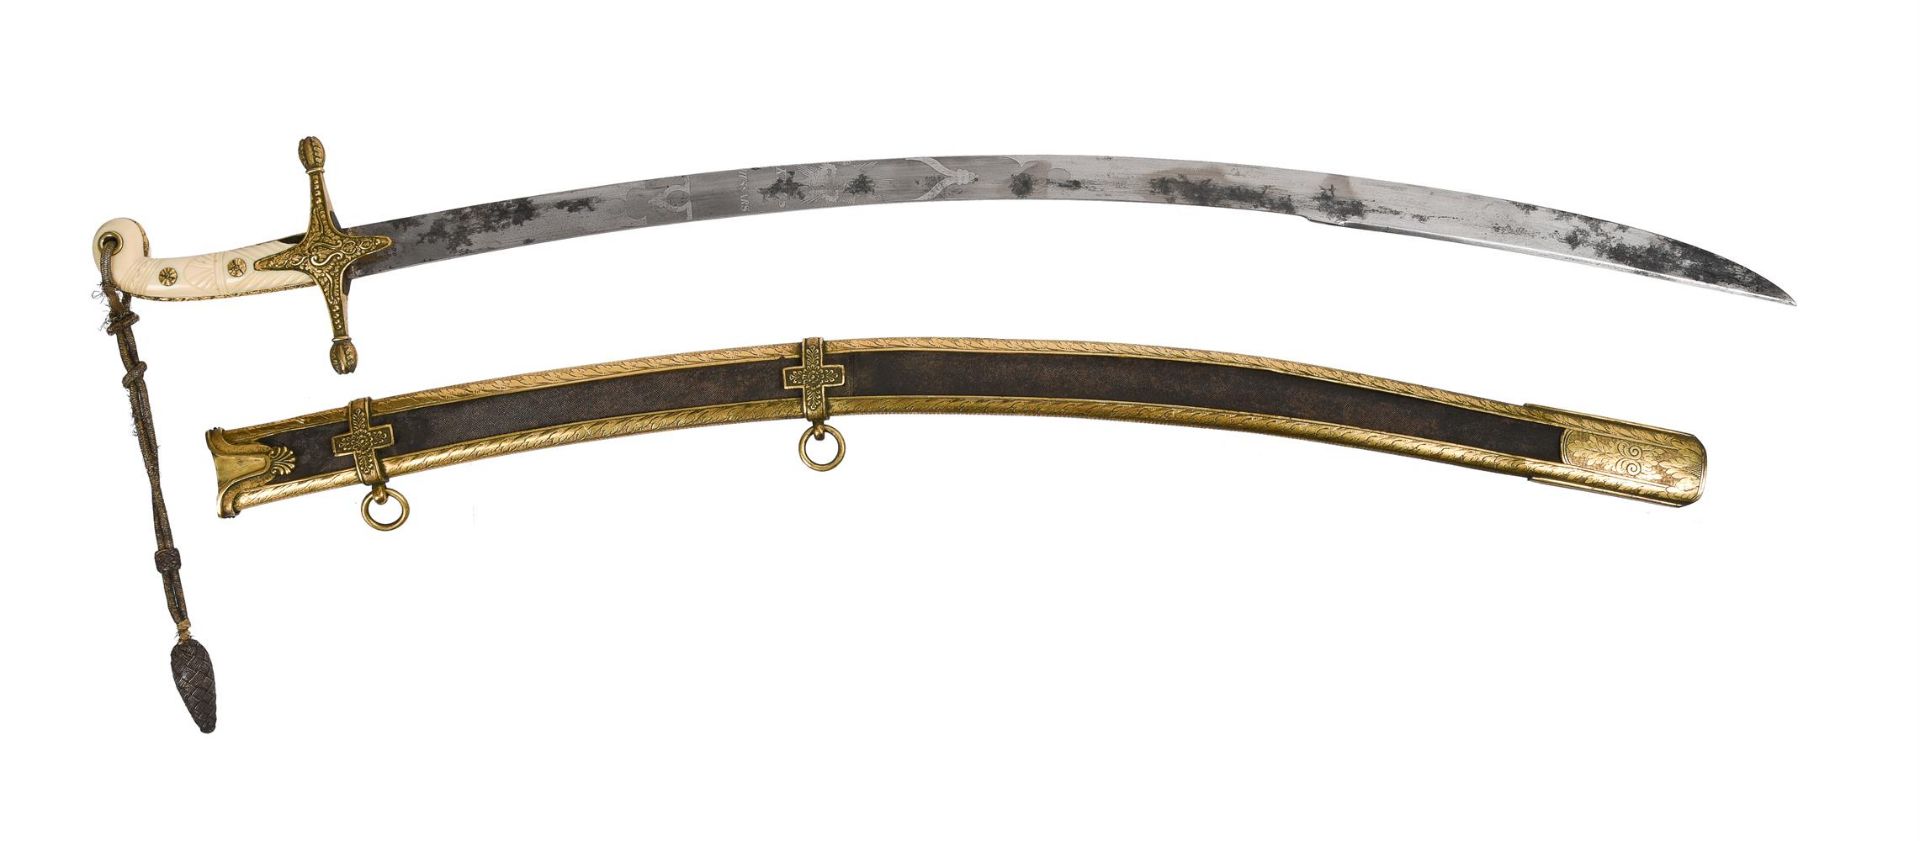 Y A GEORGE IV/WILLIAM IV LIGHT CAVALRY OFFICER'S LEVEE SCIMITAR OR 'MAMELUKE' AND SCABBARD OF THE 15 - Bild 2 aus 6